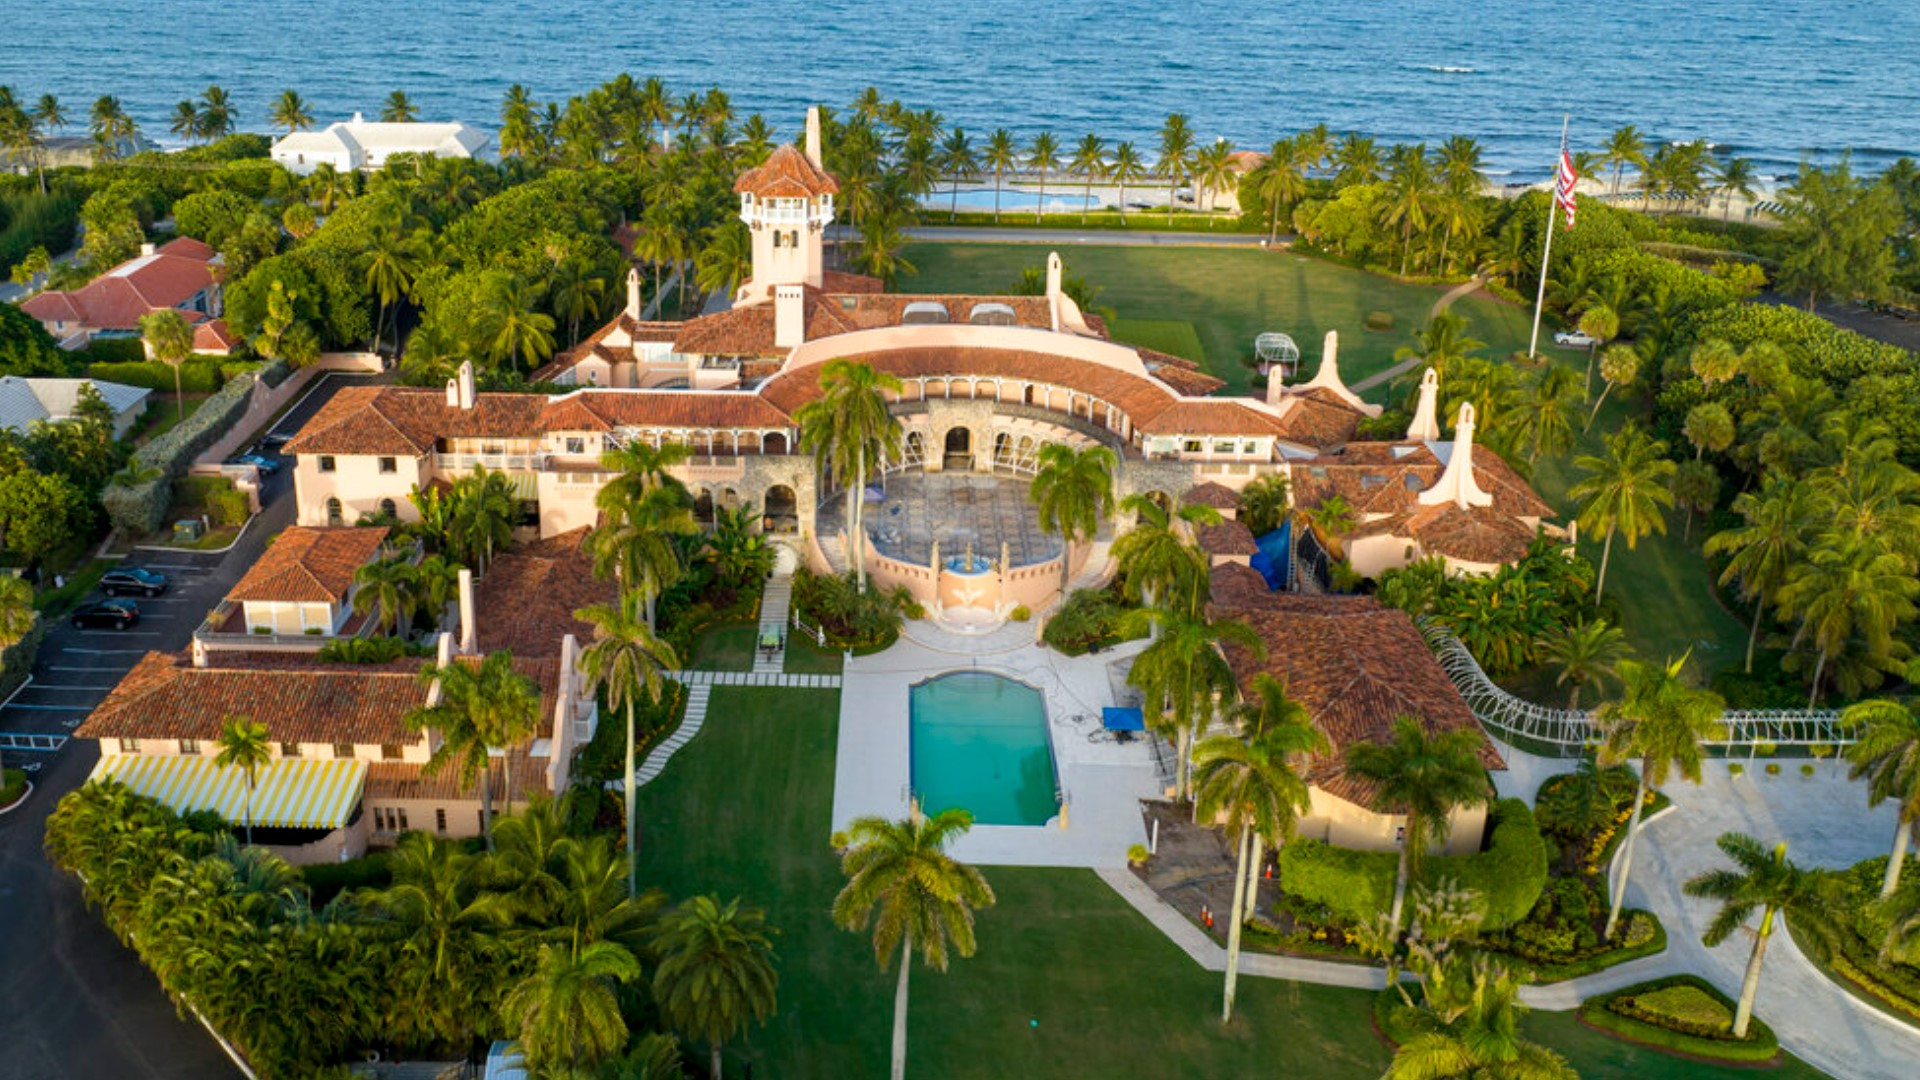 Tonya Krause-Phelan, a professor at WMU's Cooley Law School, spoke with 13 ON YOUR SIDE about the FBI raid at Mar-a-Lago to seize confidential documents.